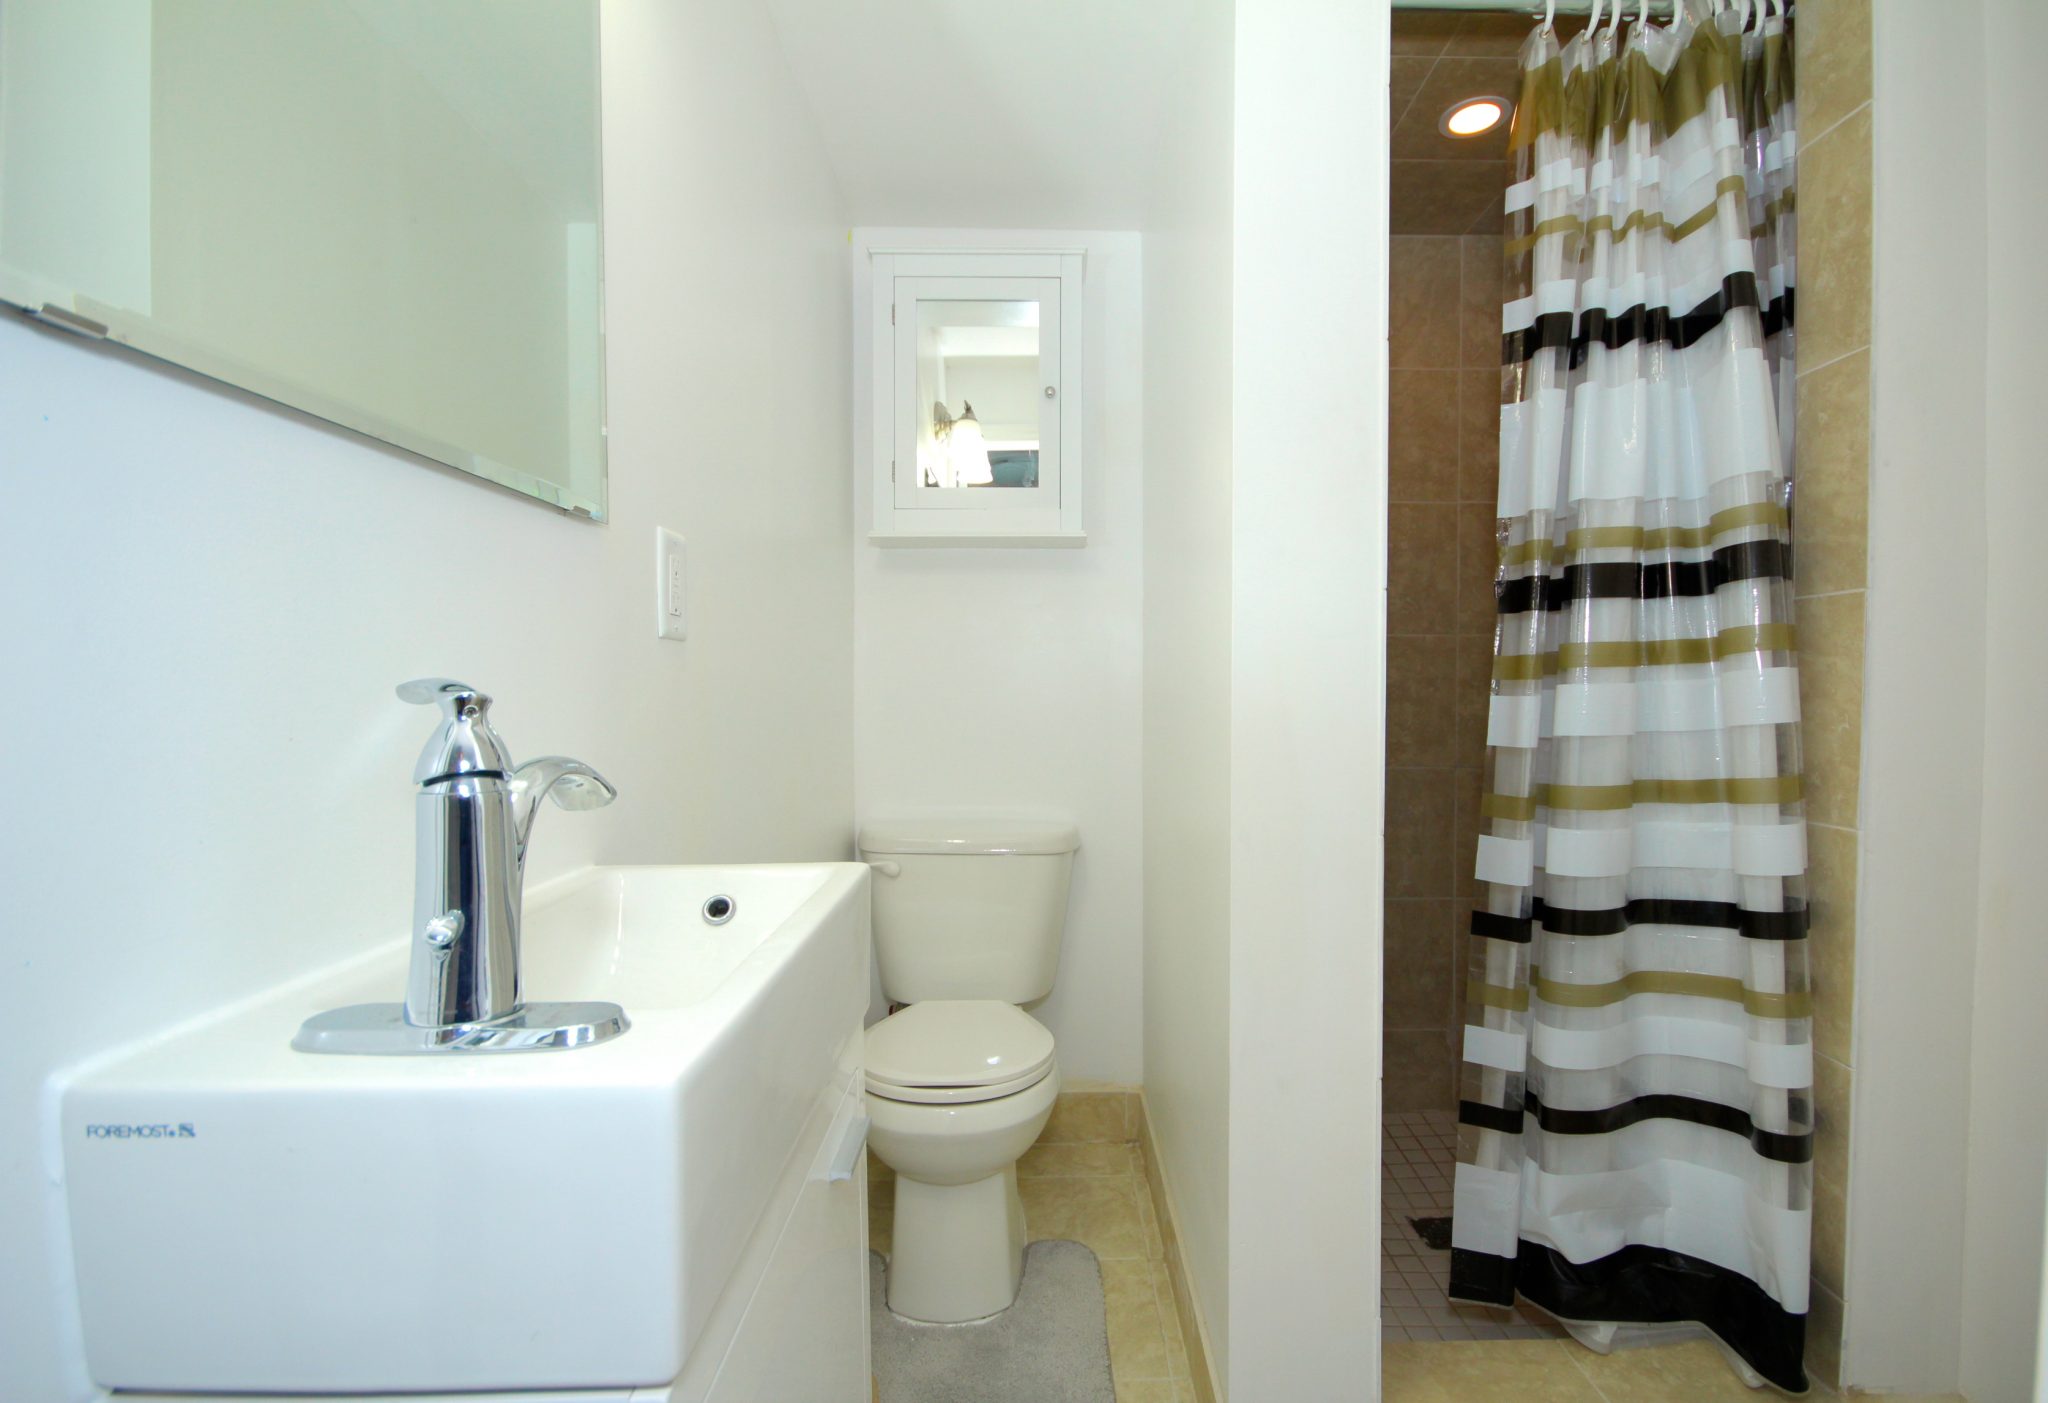 Bathroom with toilet seat and sink